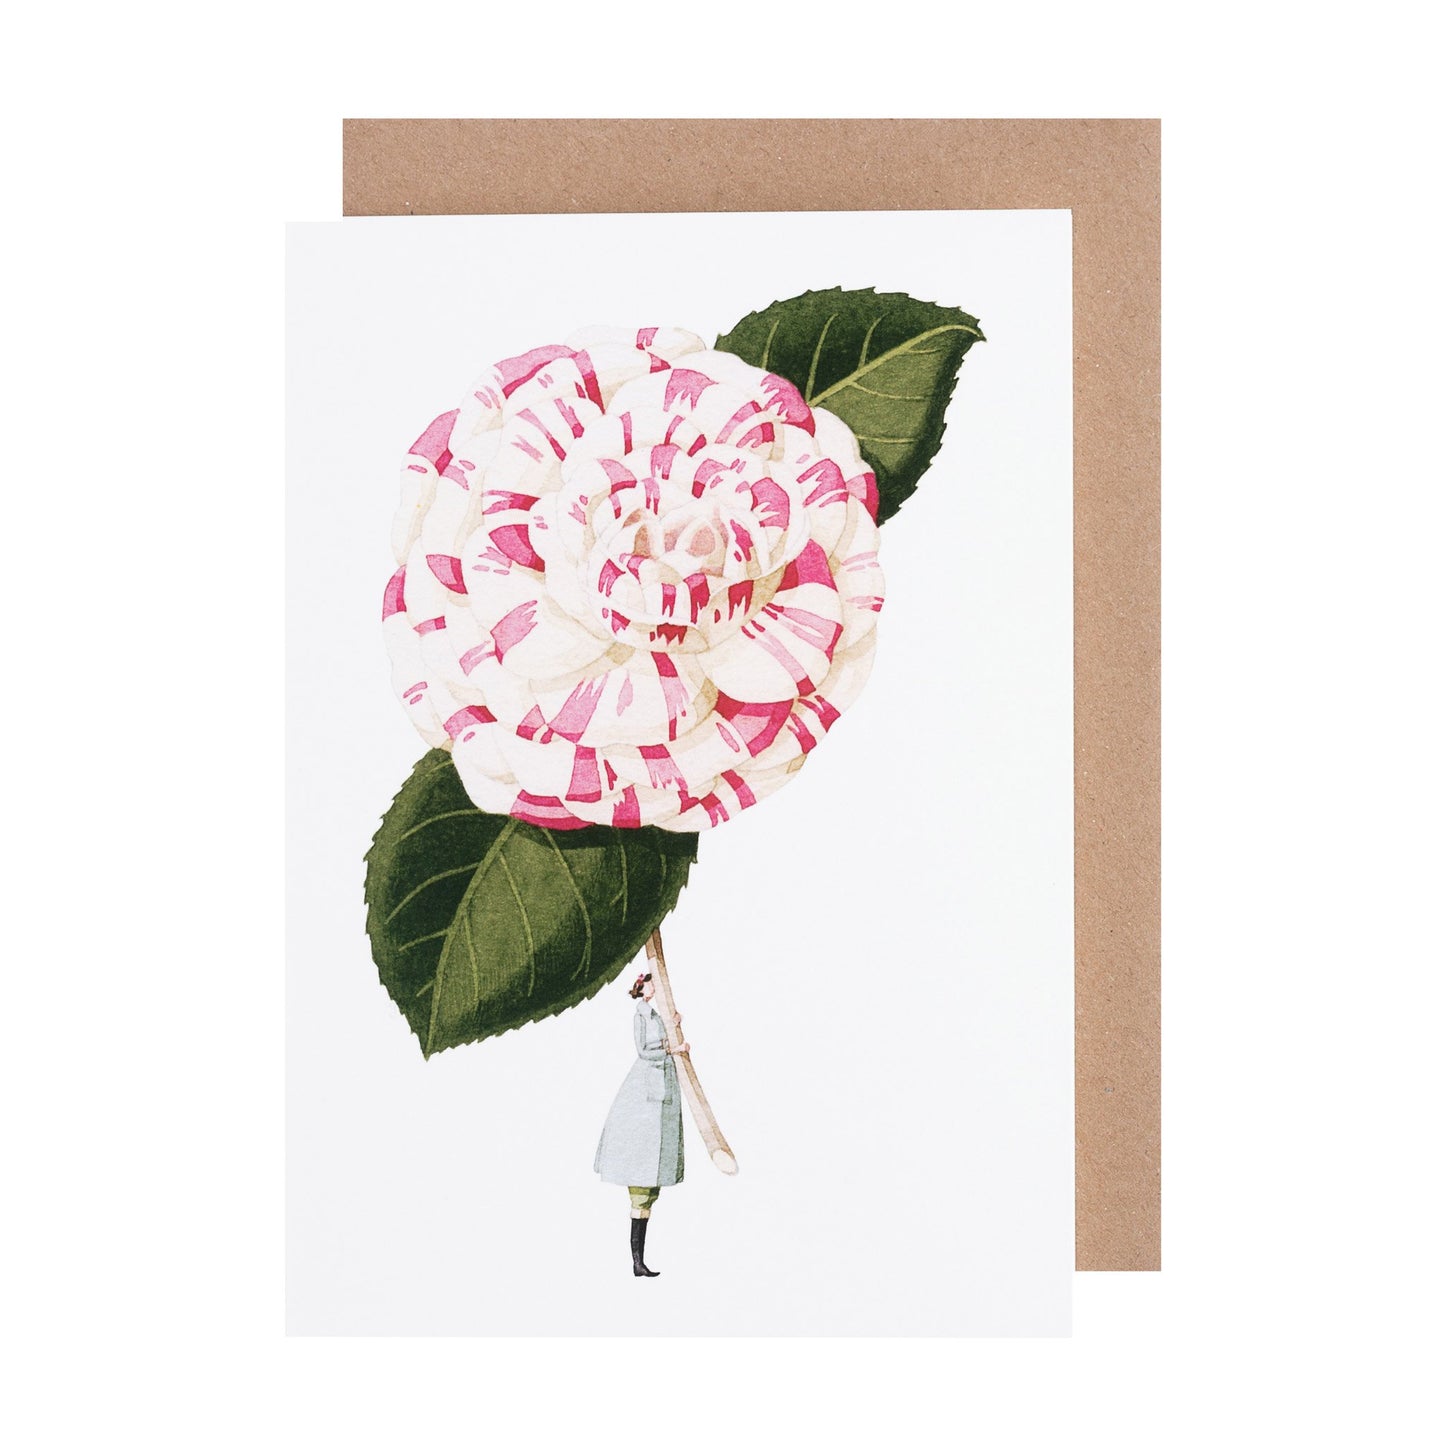 environmentally sustainable paper, compostable packaging, recycled paper, made in england, illustration, camellia, flowers